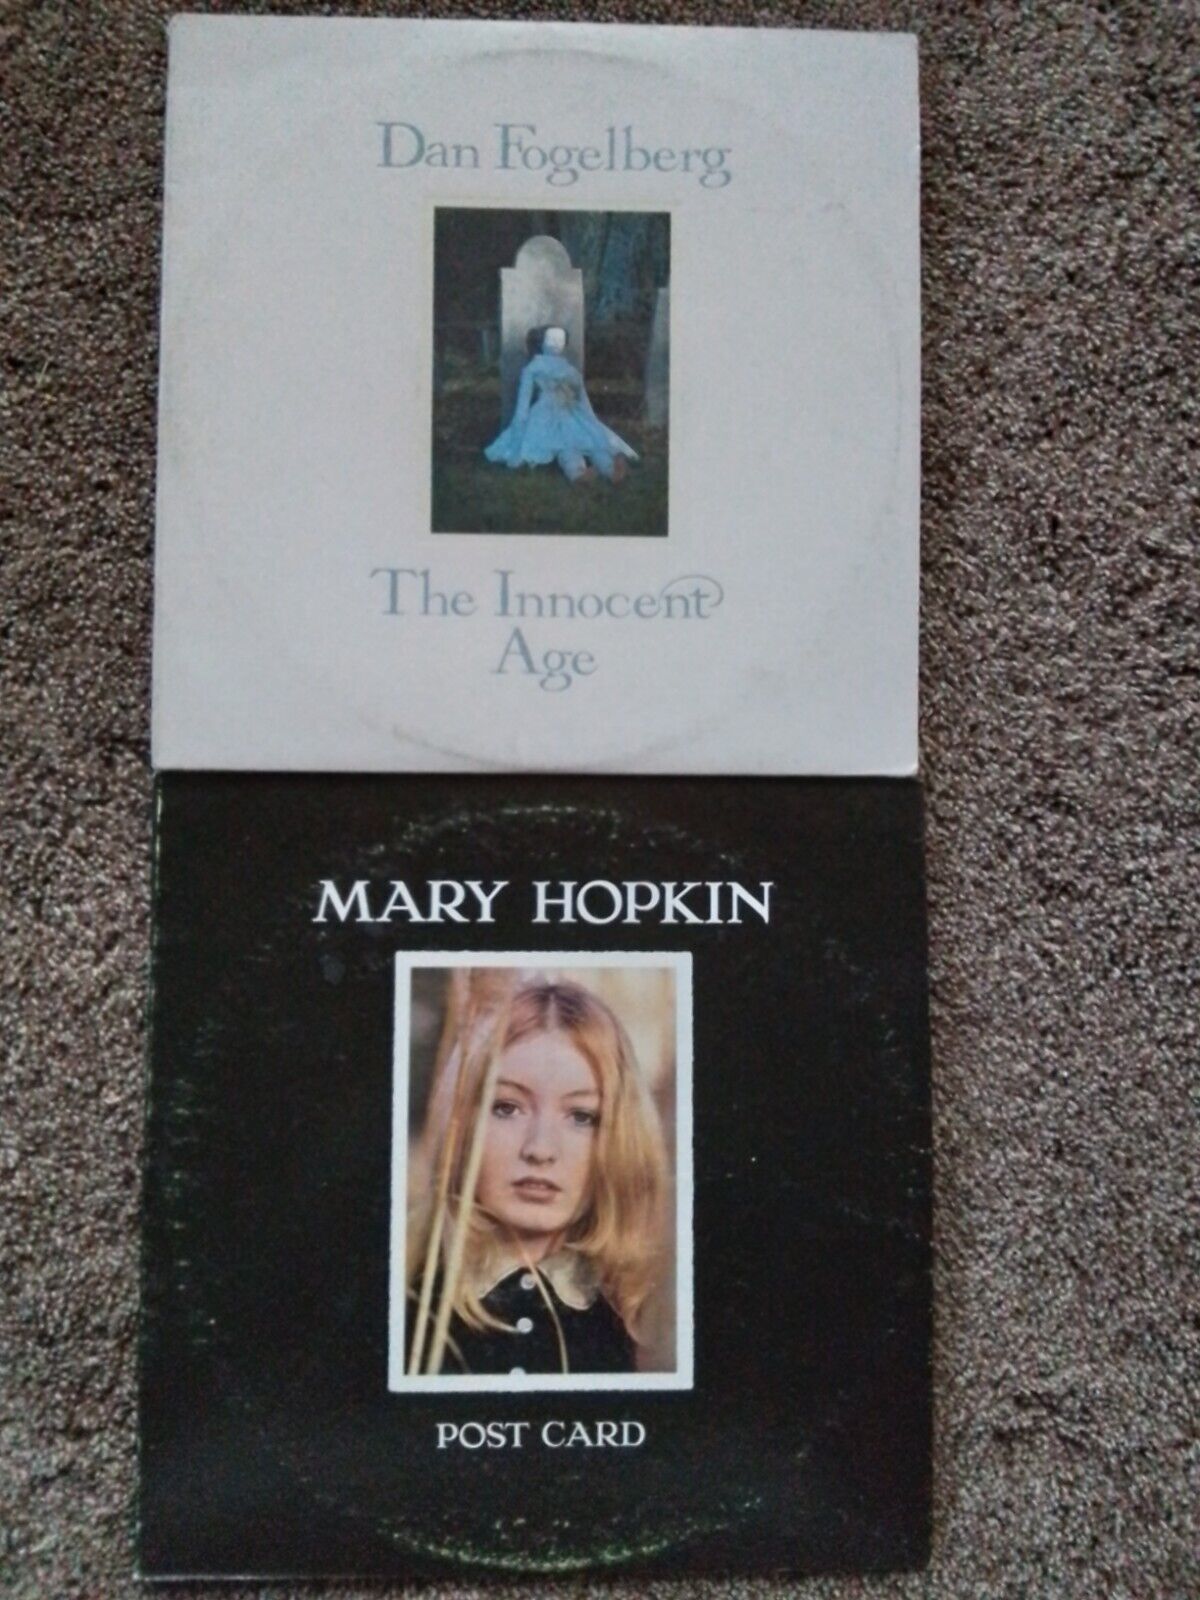 TWO VINTAGE FOLK/ROCK VINYL RECORD ALBUMS FEATURING MARY HOPKINS